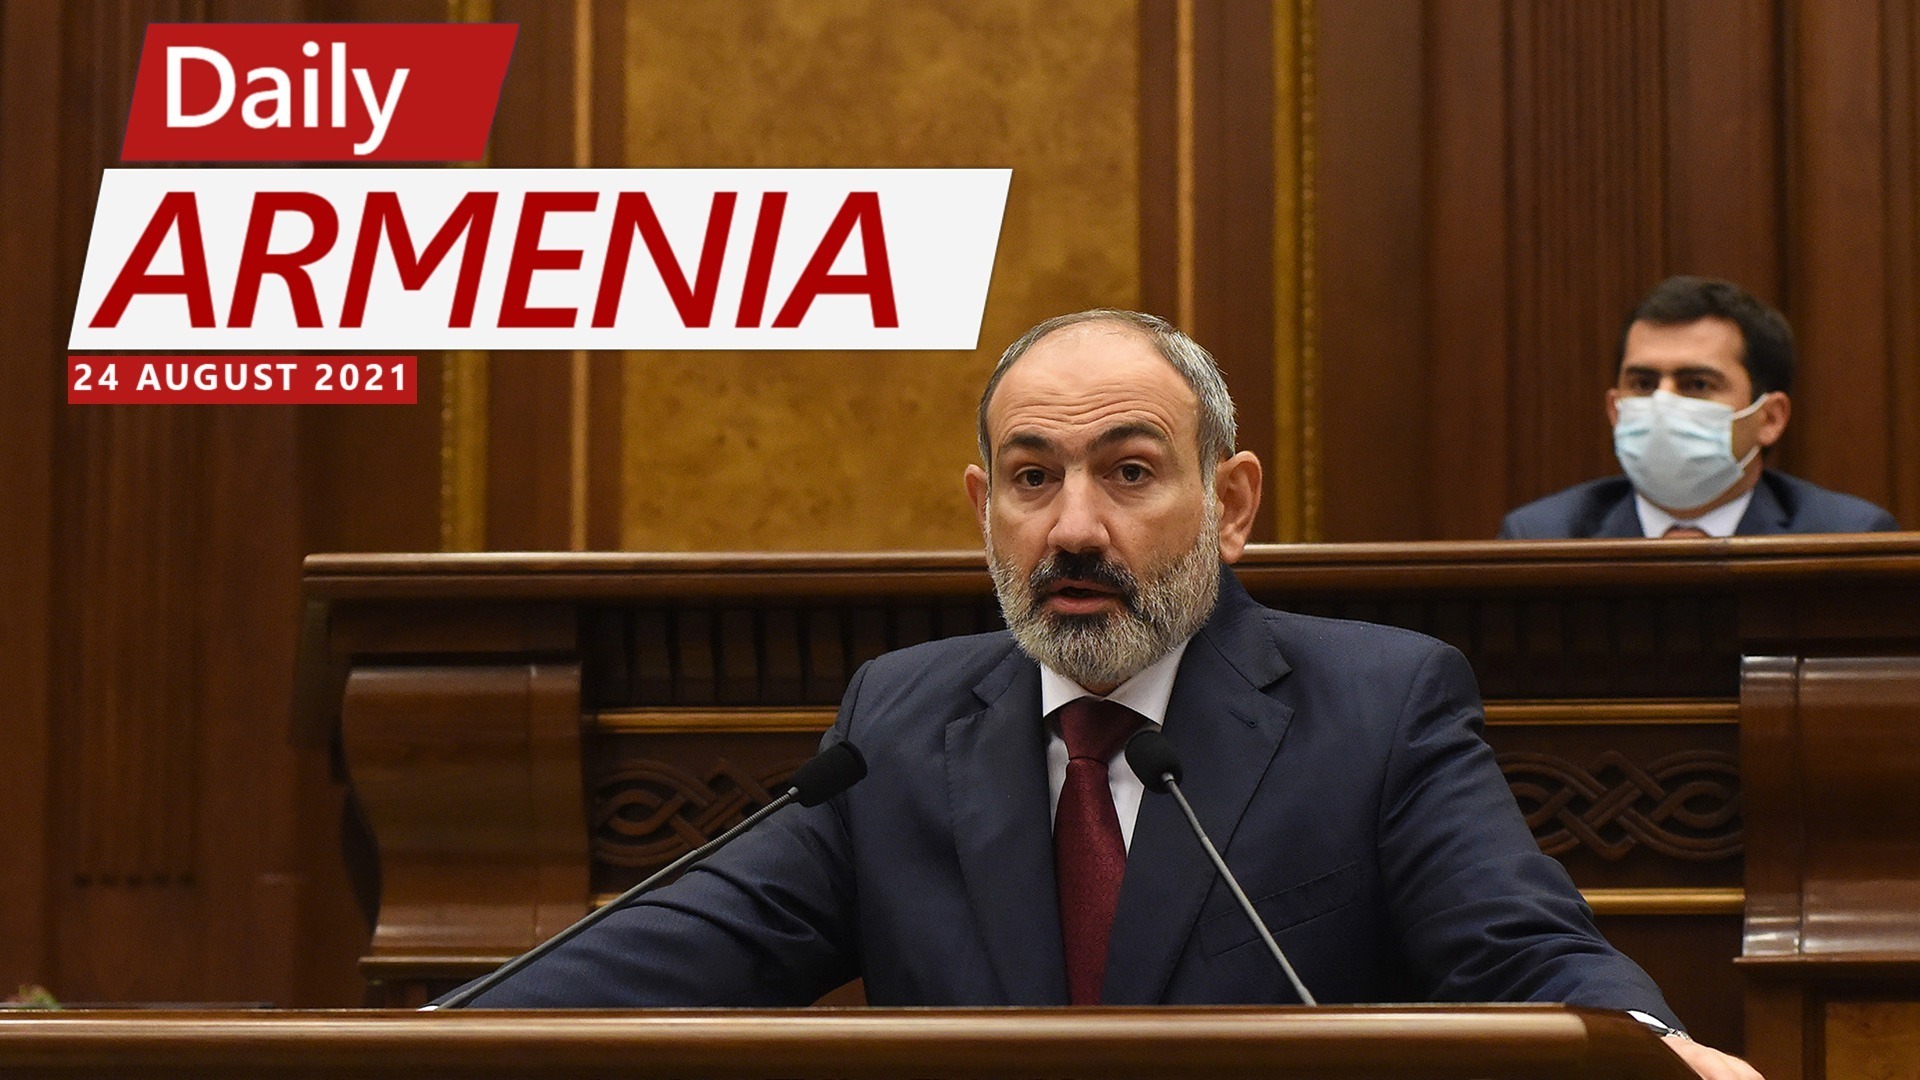 Pashinyan’s appearance in parliament ends in a scuffle